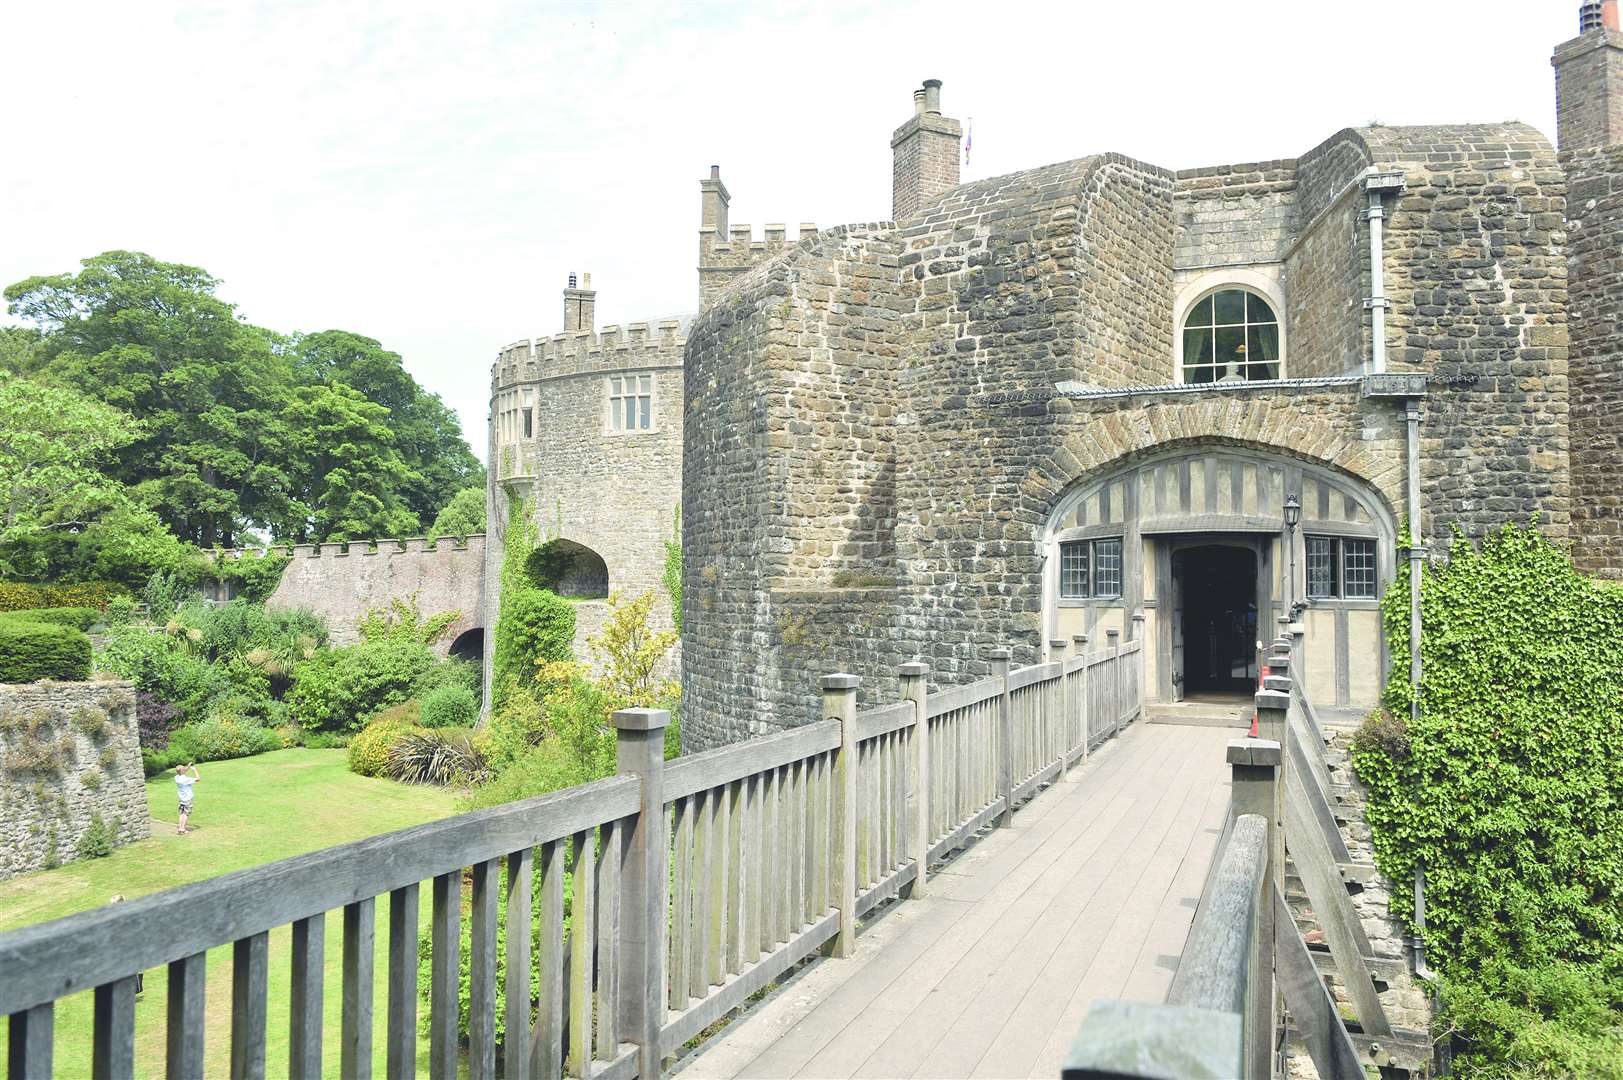 Walmer Castle was built in the 16th century